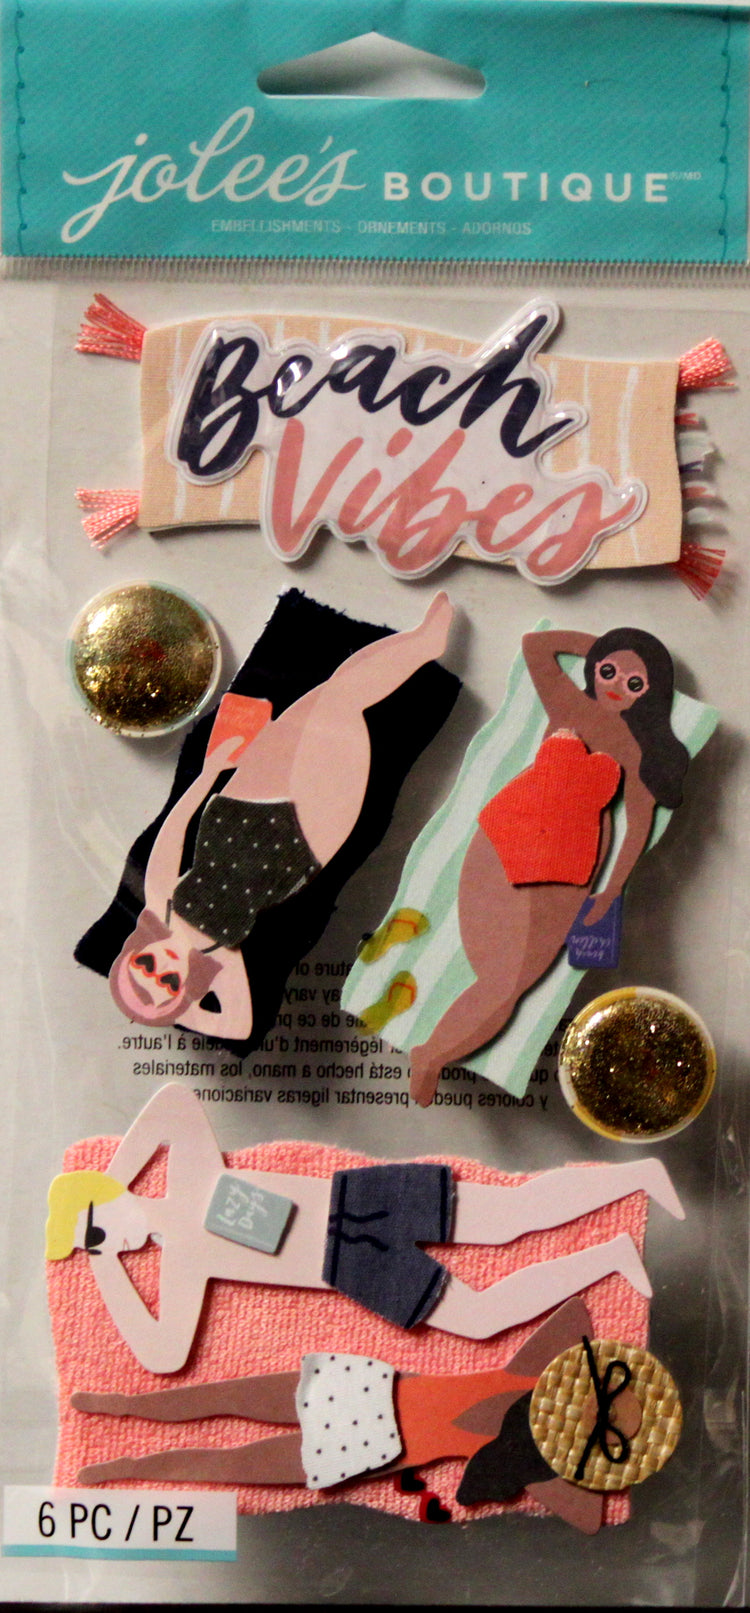 Jolee's Boutique Lounging Beach Vibes Dimensional Stickers